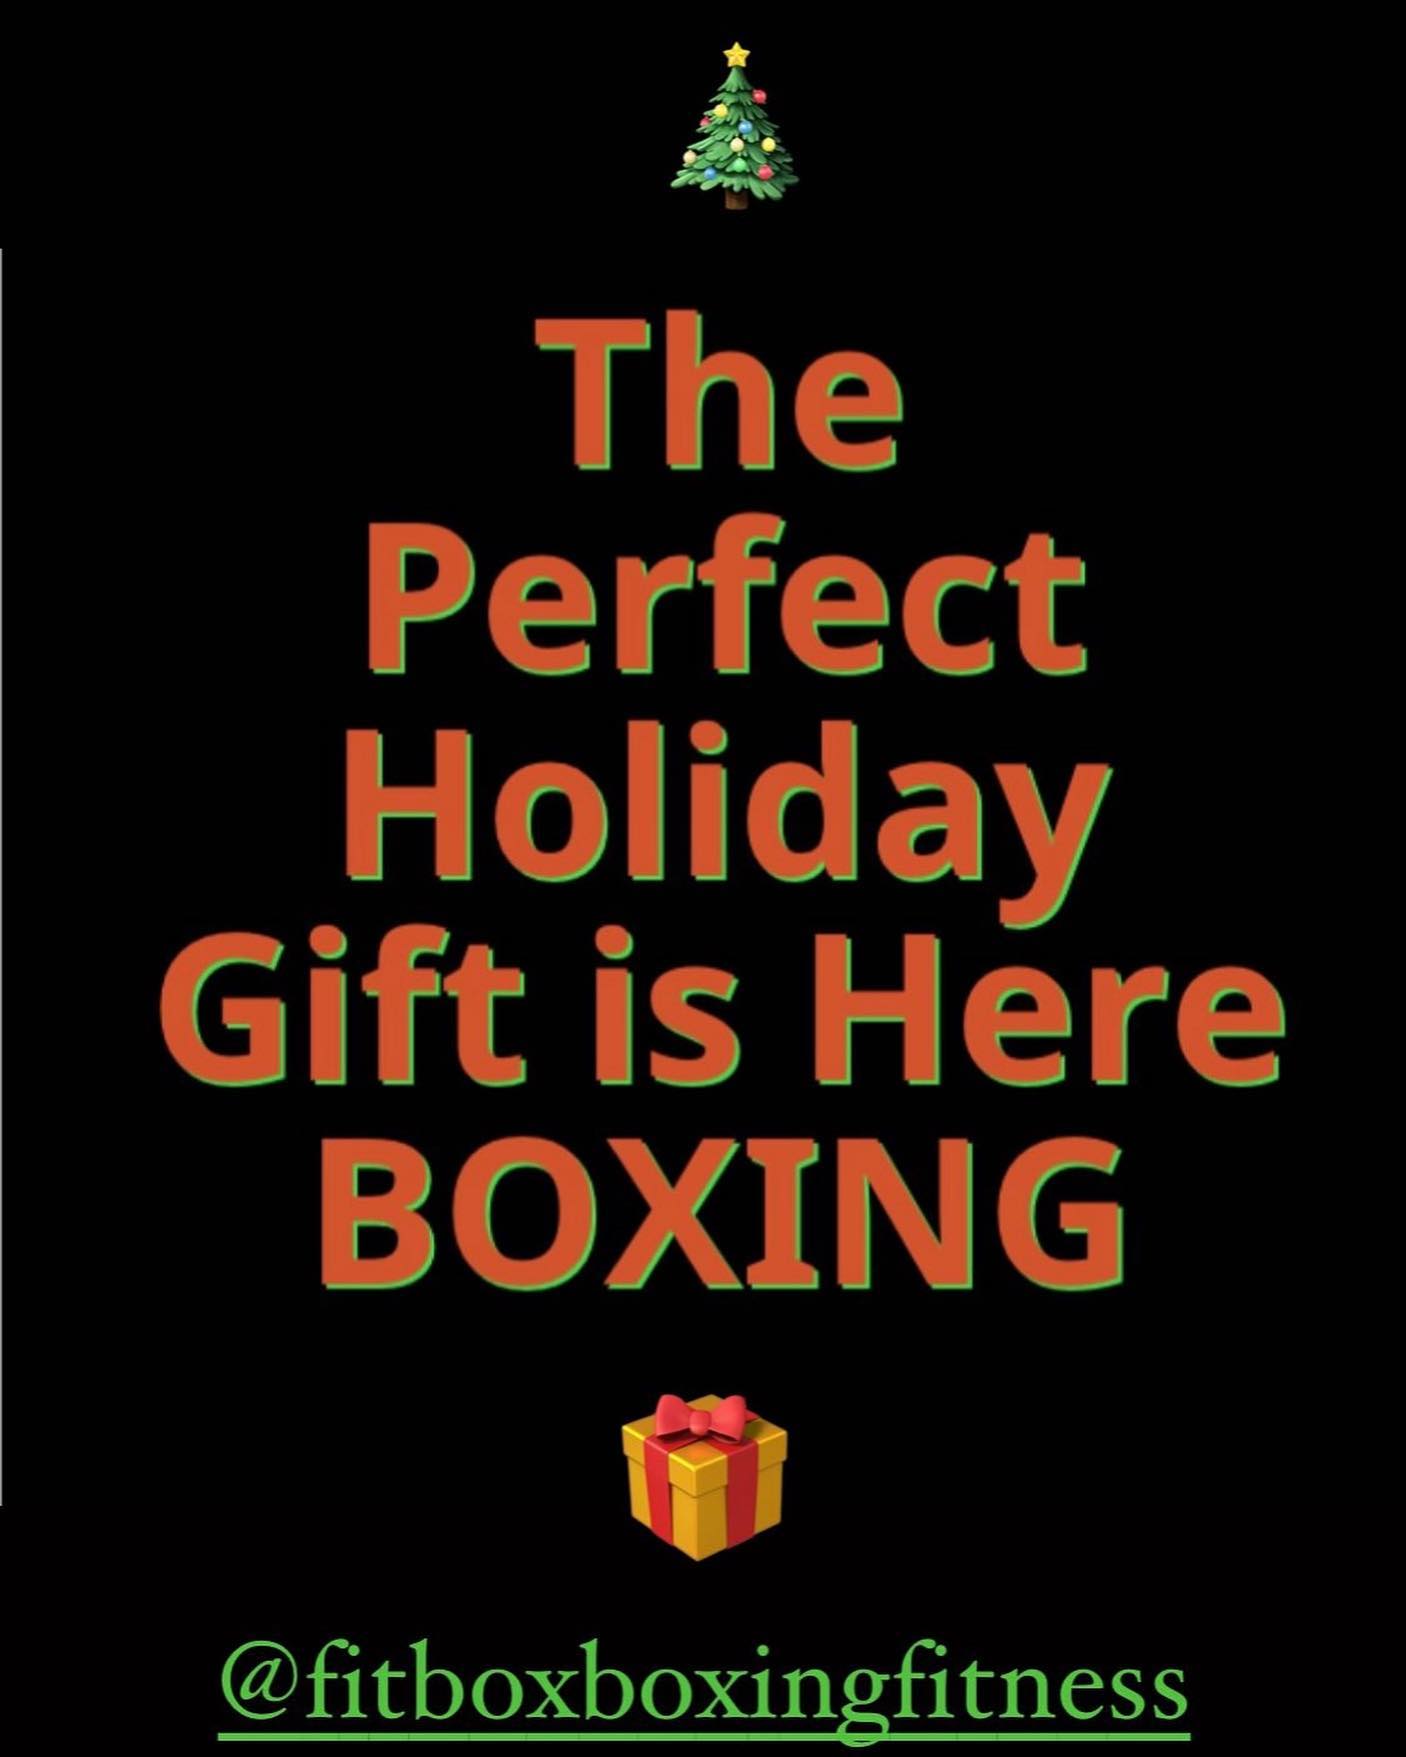 FitBOX’s Boxing Stocking stuffers - 20% off Gift cards for 3 one-on-one Boxing sessions with Boston’s well-known Boxing trainer @tommymcinerney